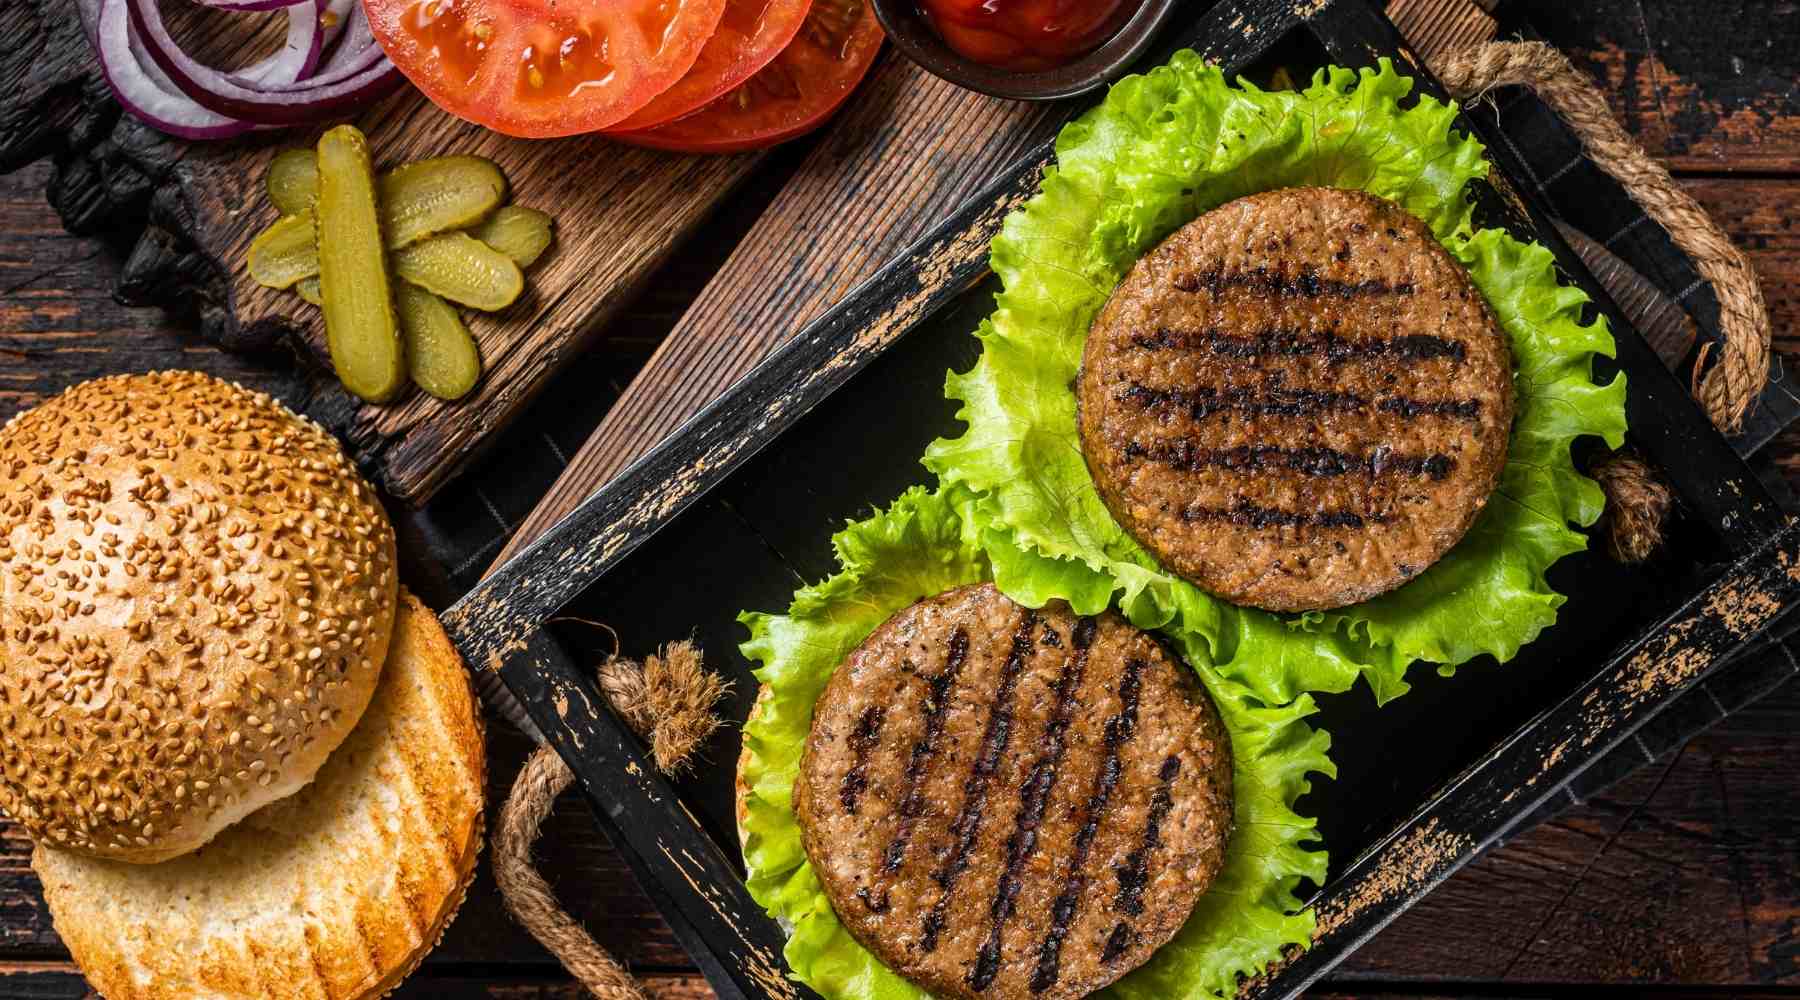 How is Plant-Based Meat Made?